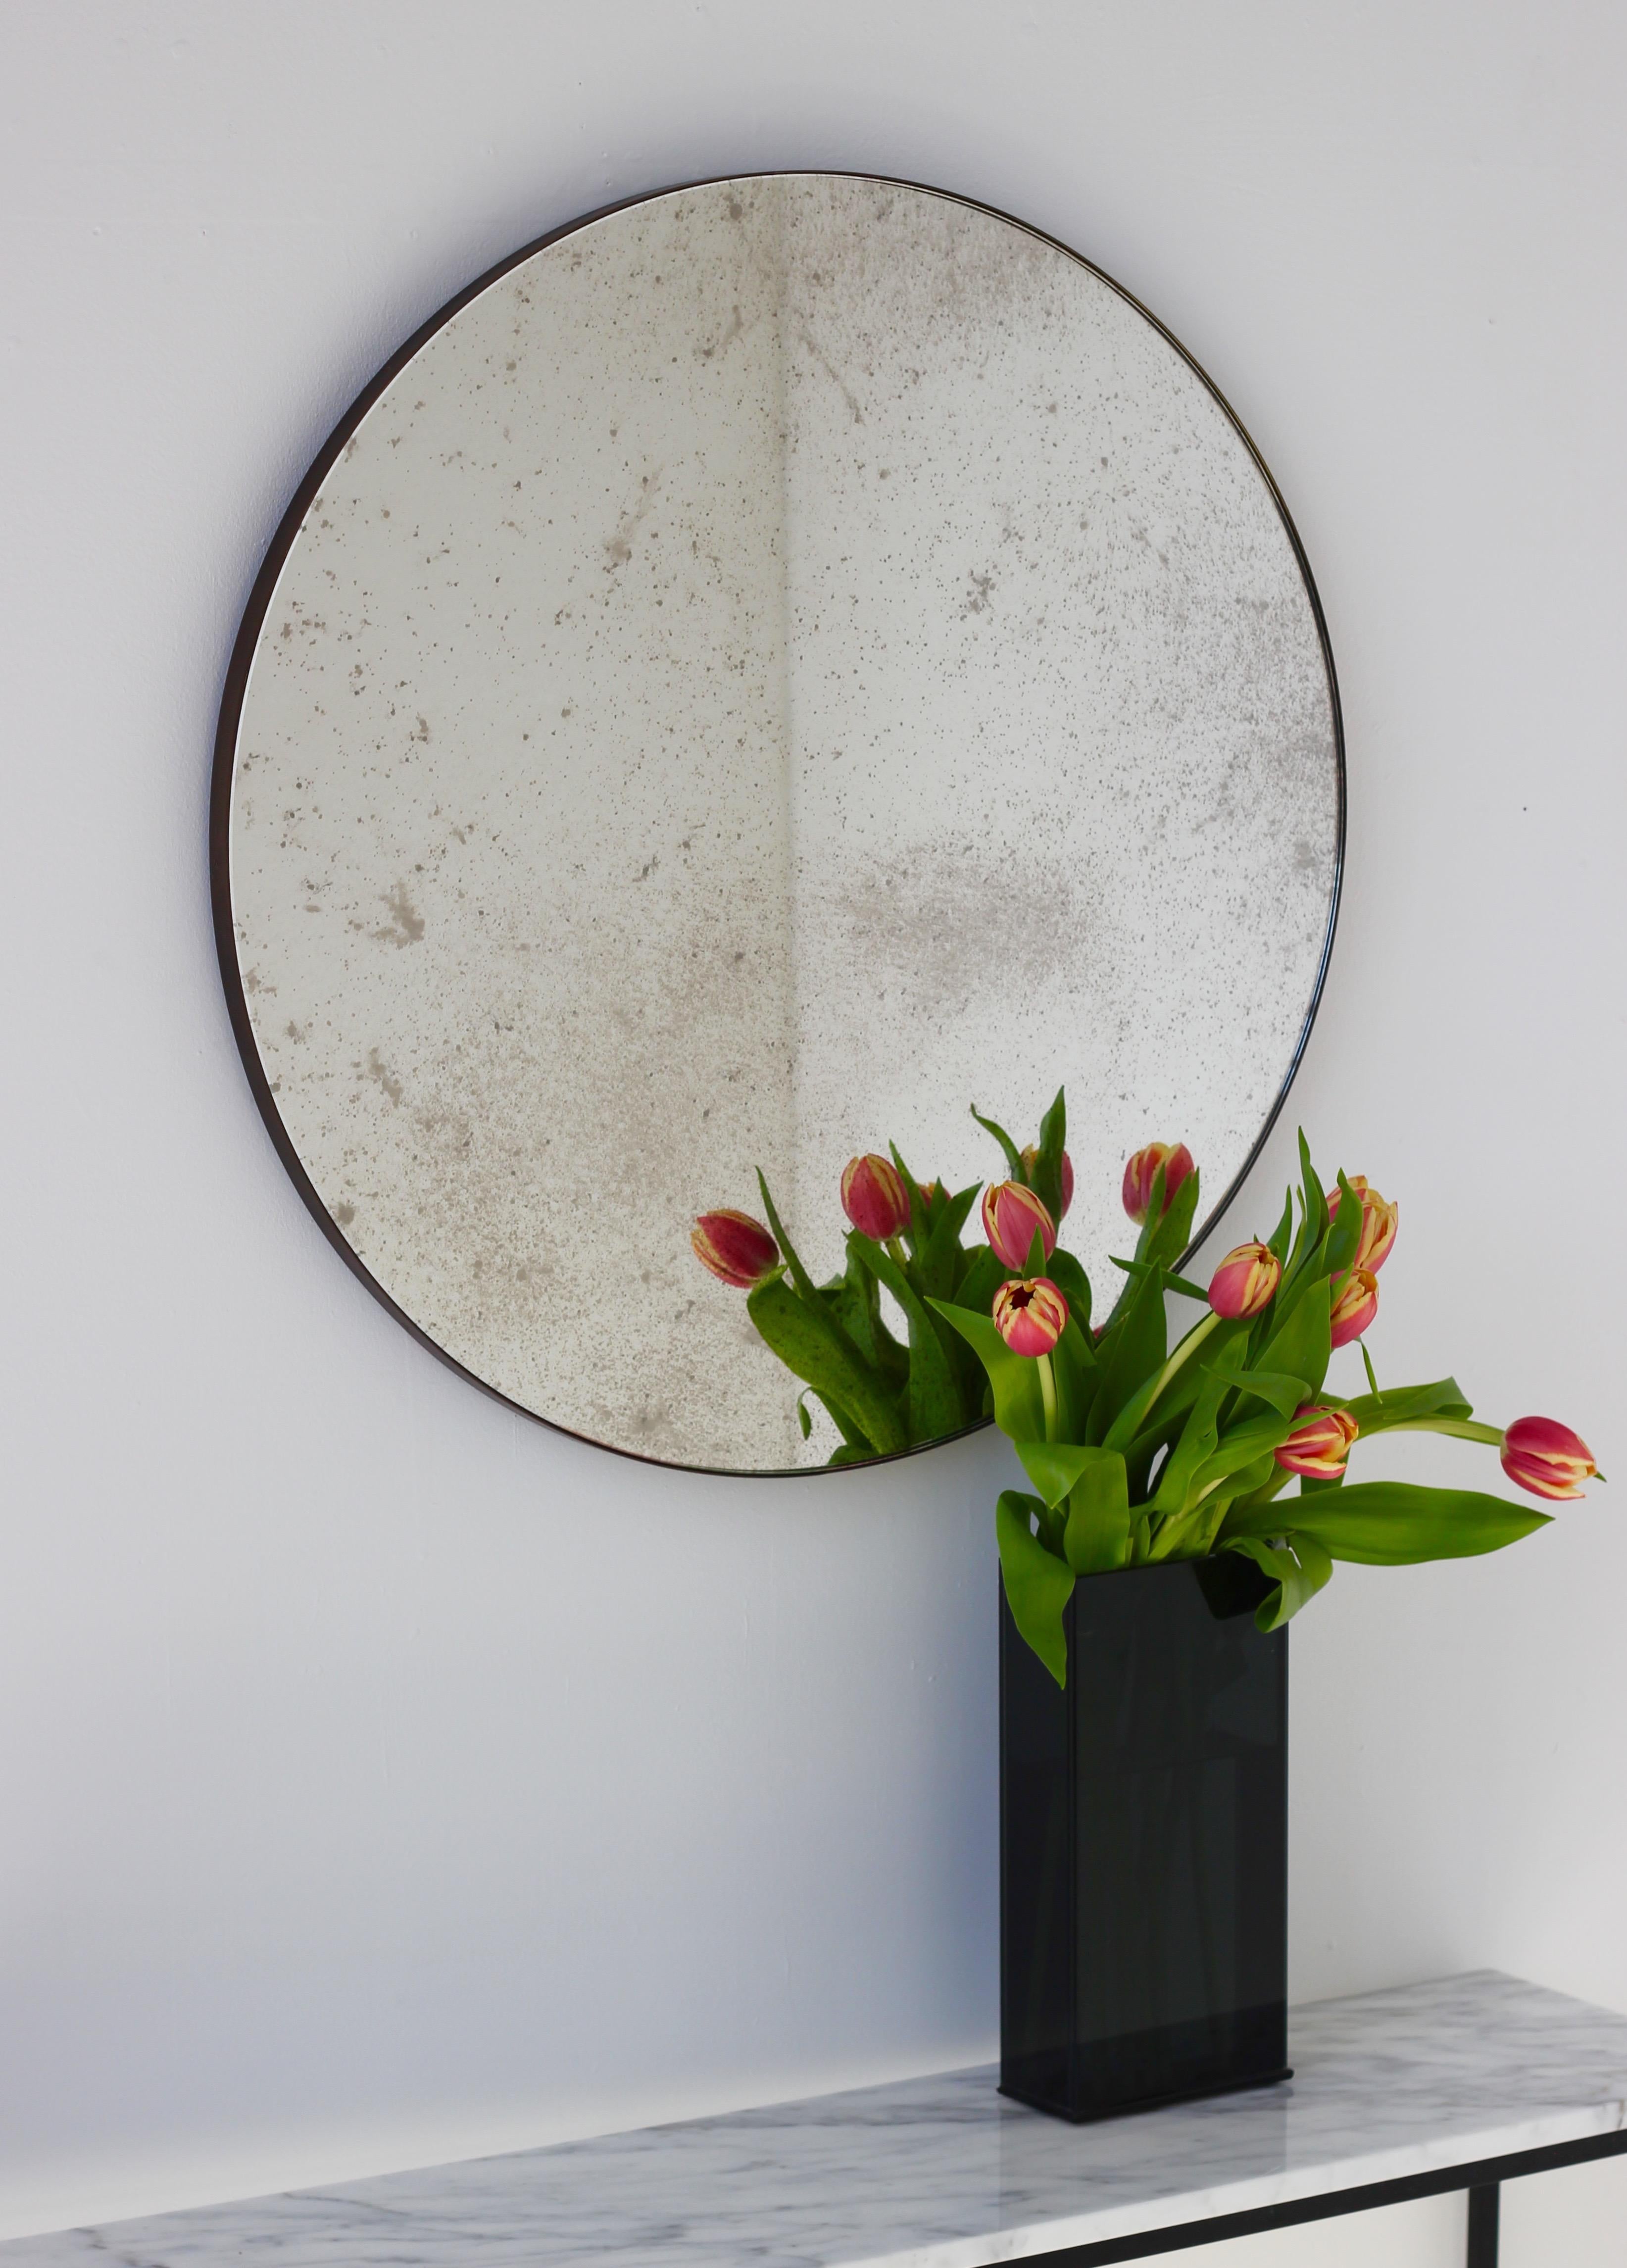 Delightful antiqued Orbis™ round mirror with a minimalist bronze patina brass frame. Designed and handcrafted in London, UK.

Medium, large and extra-large mirrors (60, 80 and 100cm) are fitted with an ingenious French cleat (split batten) system so